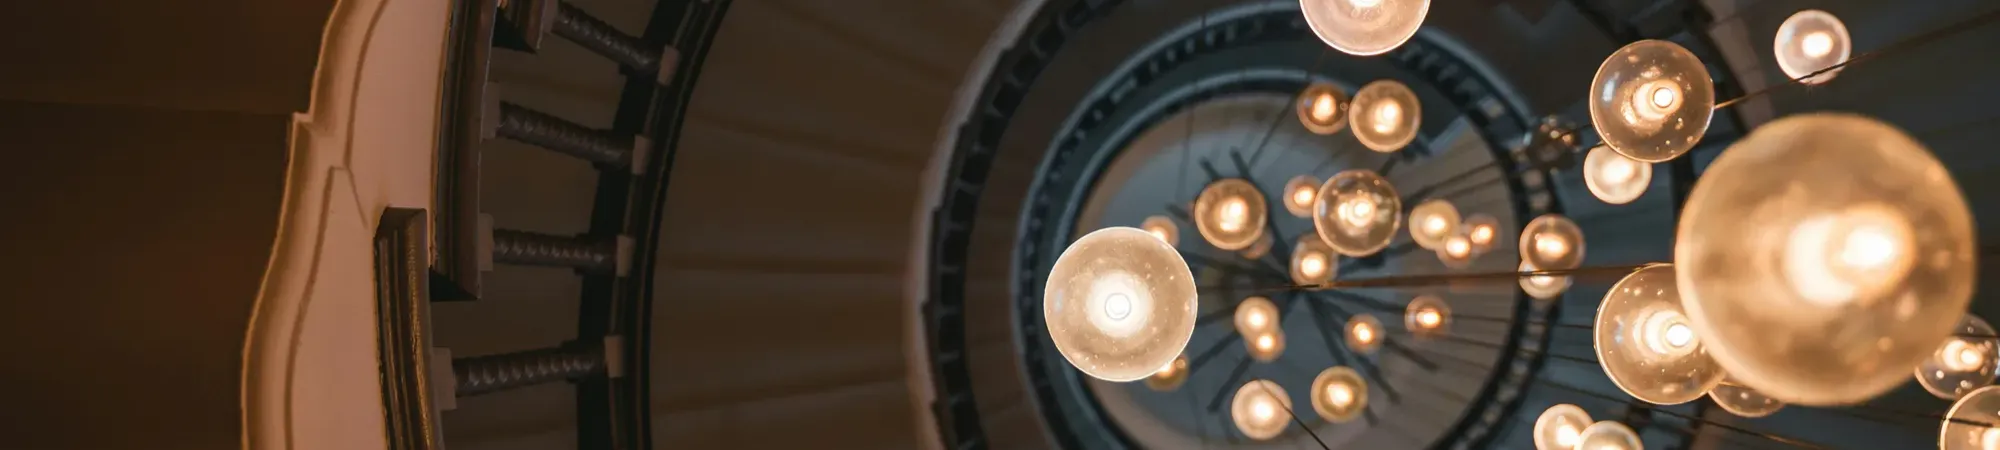 Spiral stair case with round light bulbs